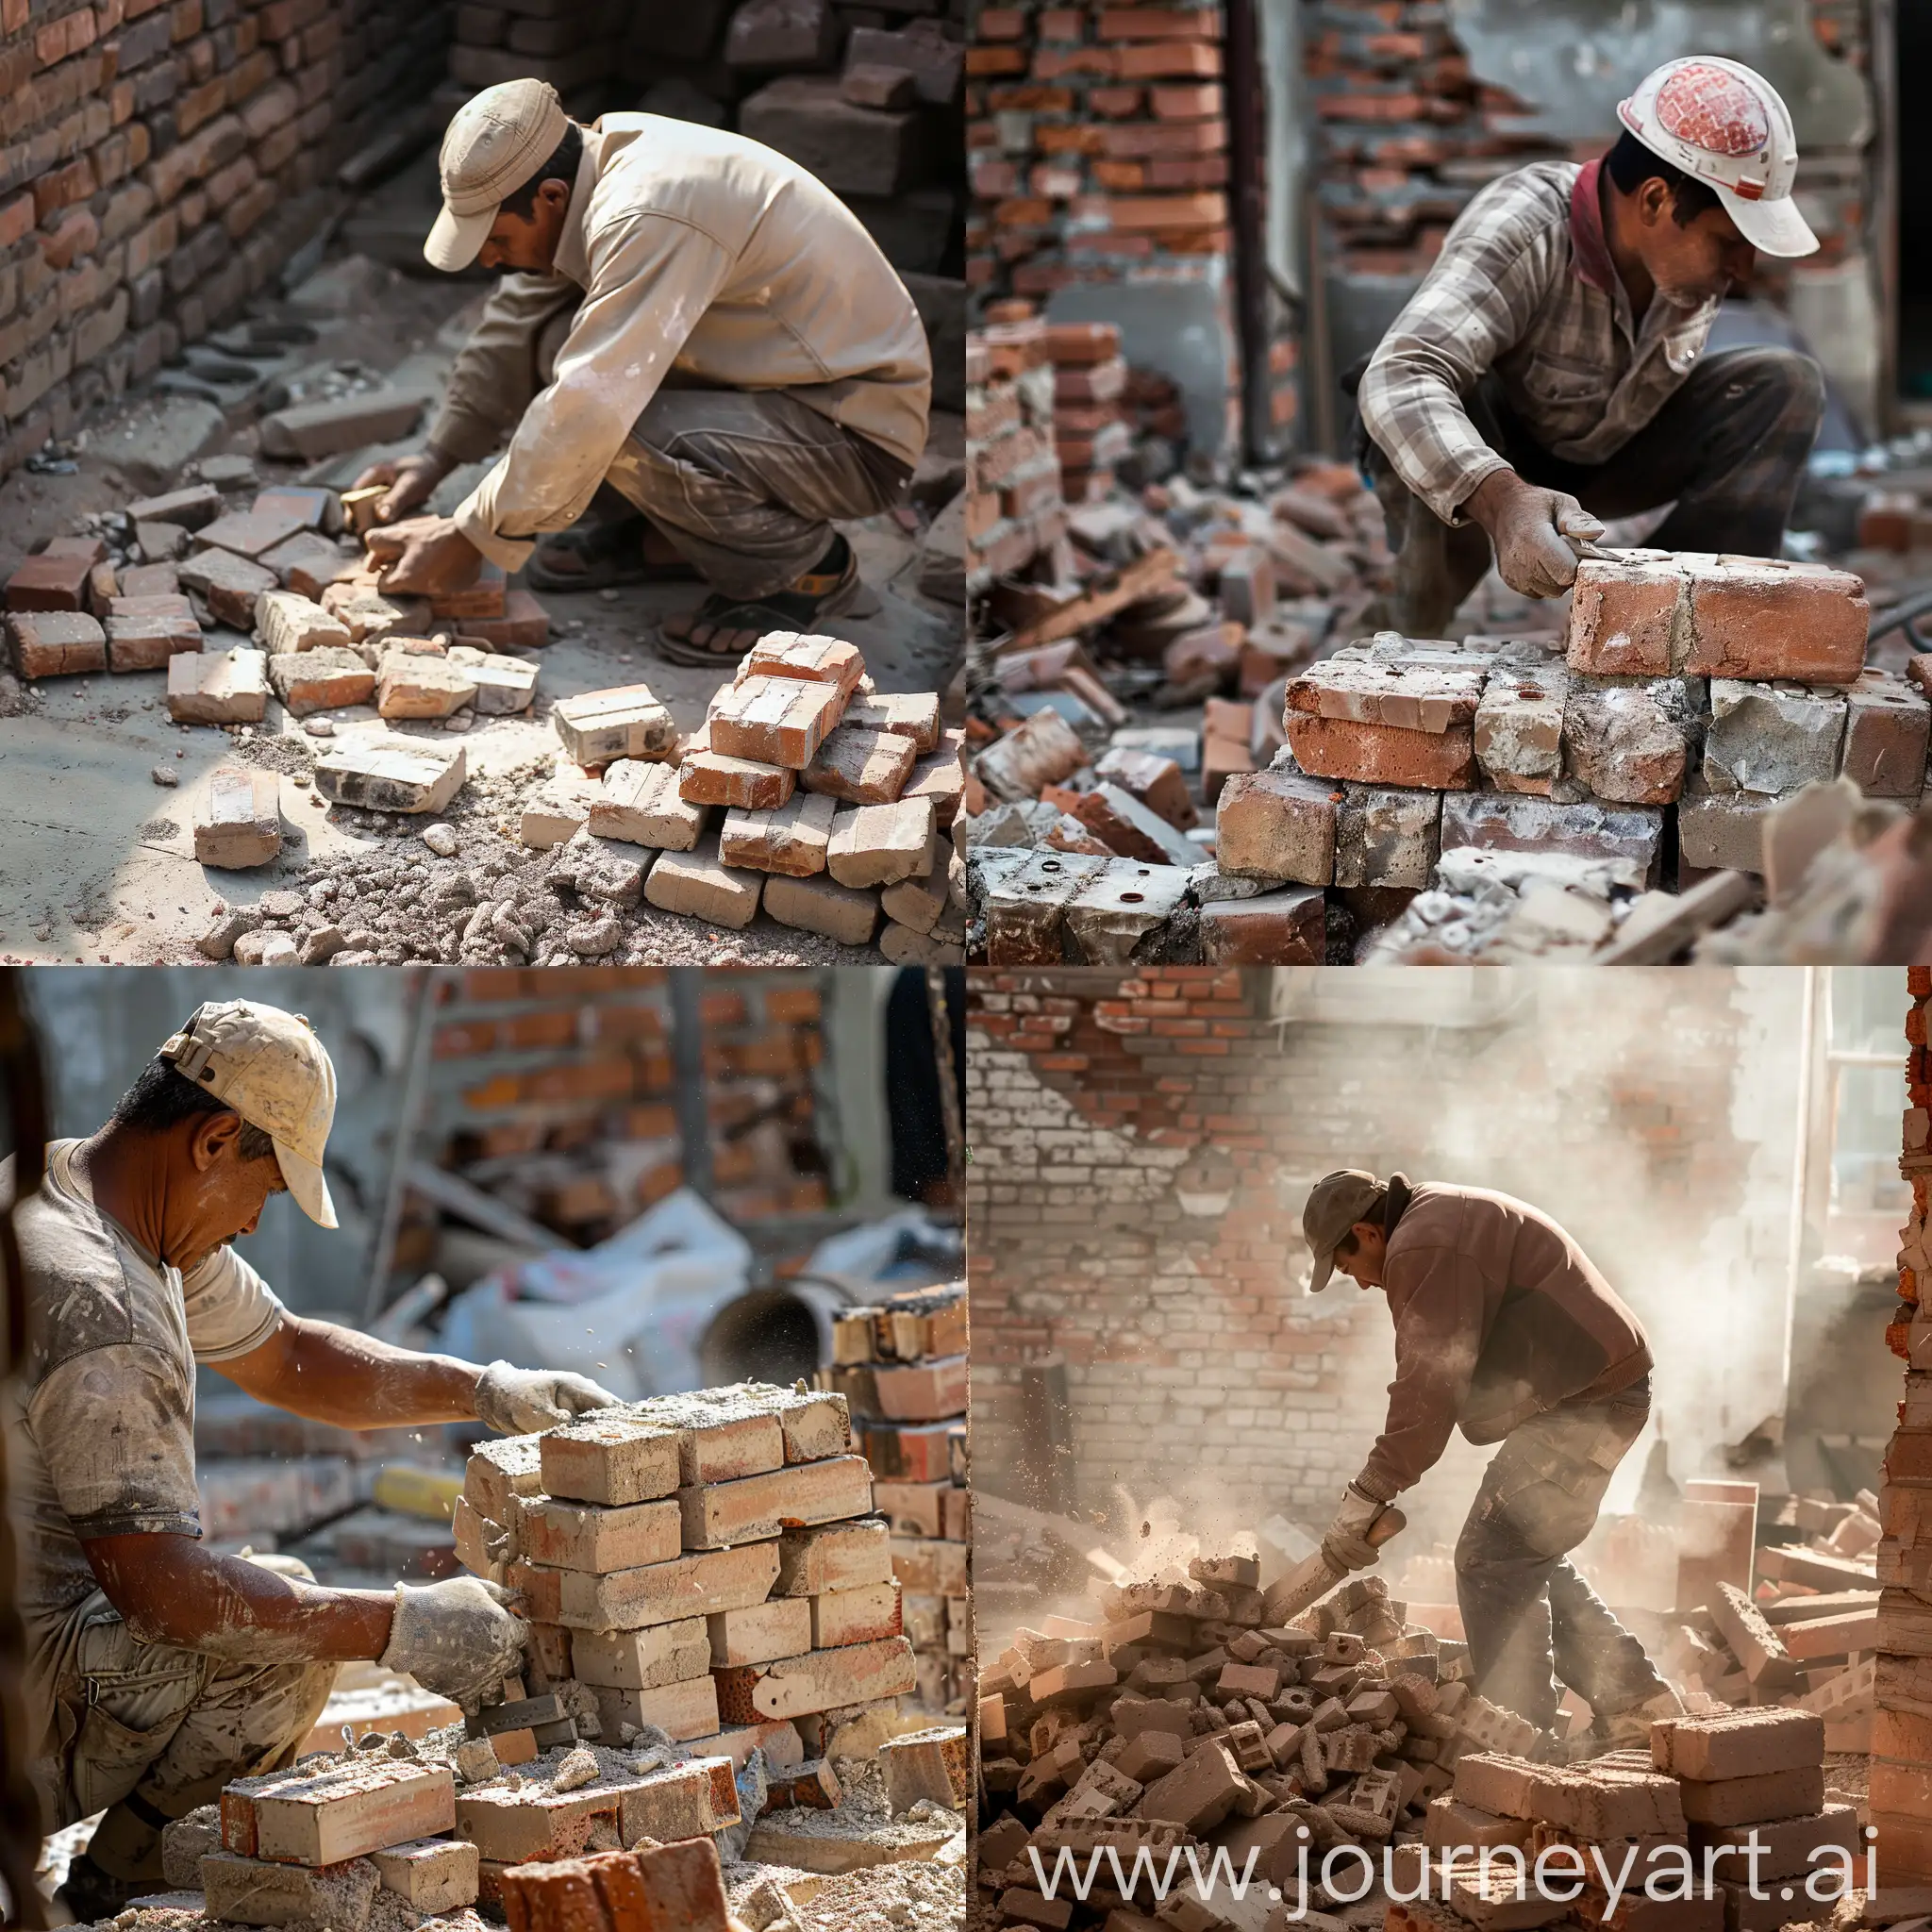 Worker-Moving-Bricks-in-Urban-Construction-Site